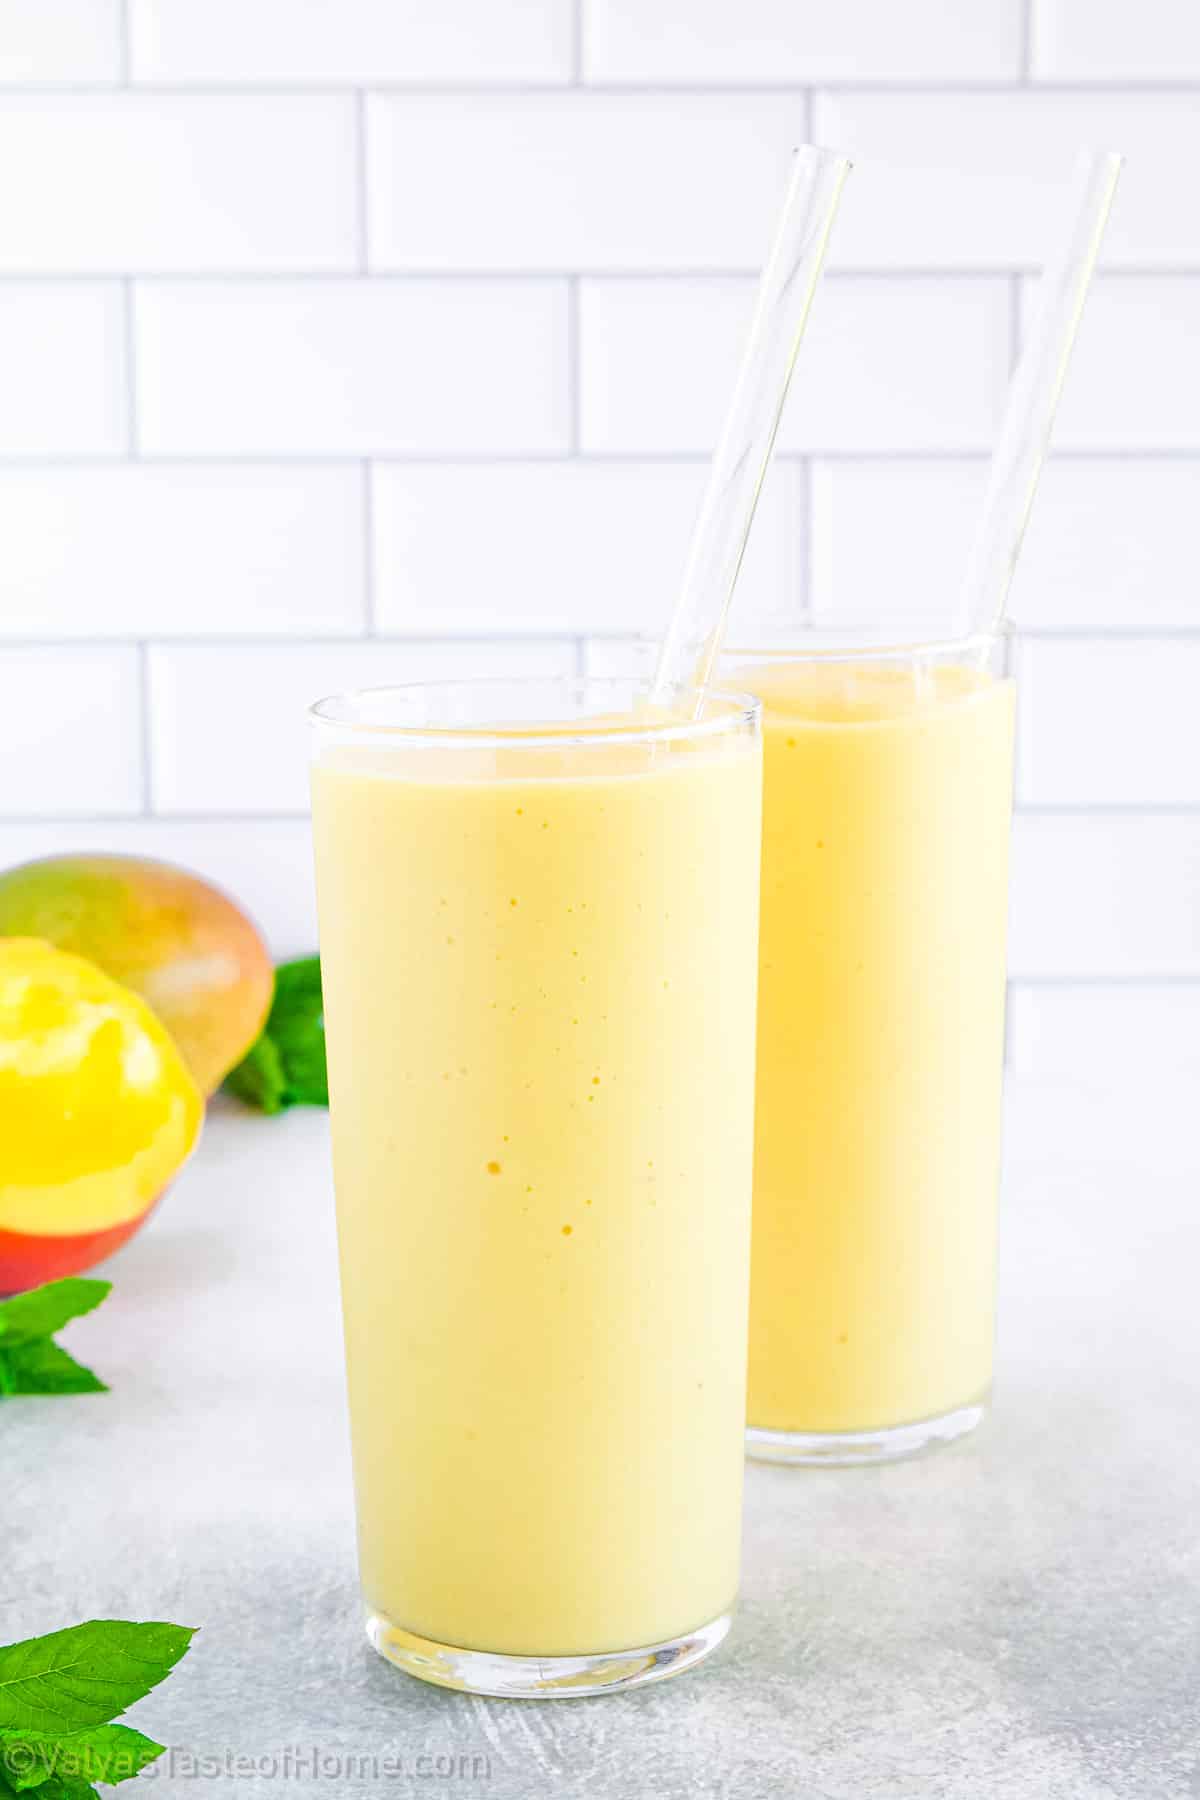 This Tropical Smoothie features the most delicious blend of tropical fruits, from mango chunks, bananas, to pineapple chunks, with some coconut milk for the tastiest smoothie you’ve had all year!